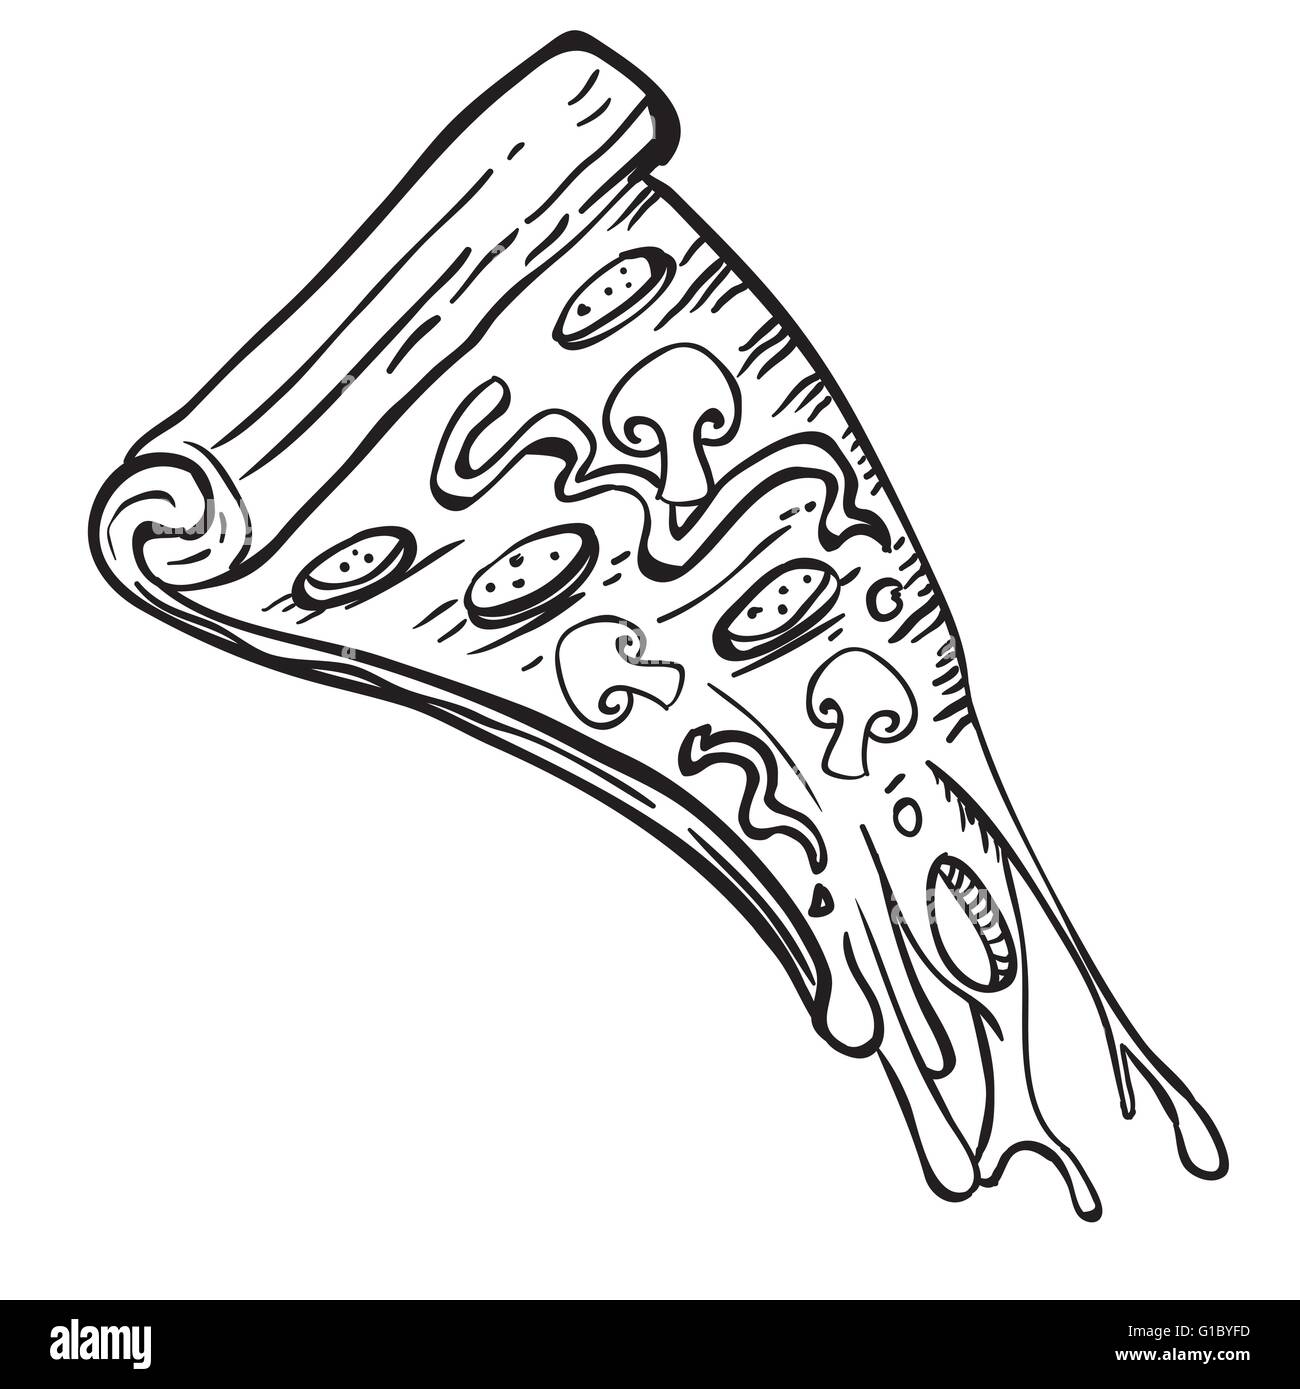 simple black and white dripping slice of pizza cartoon Stock Vector